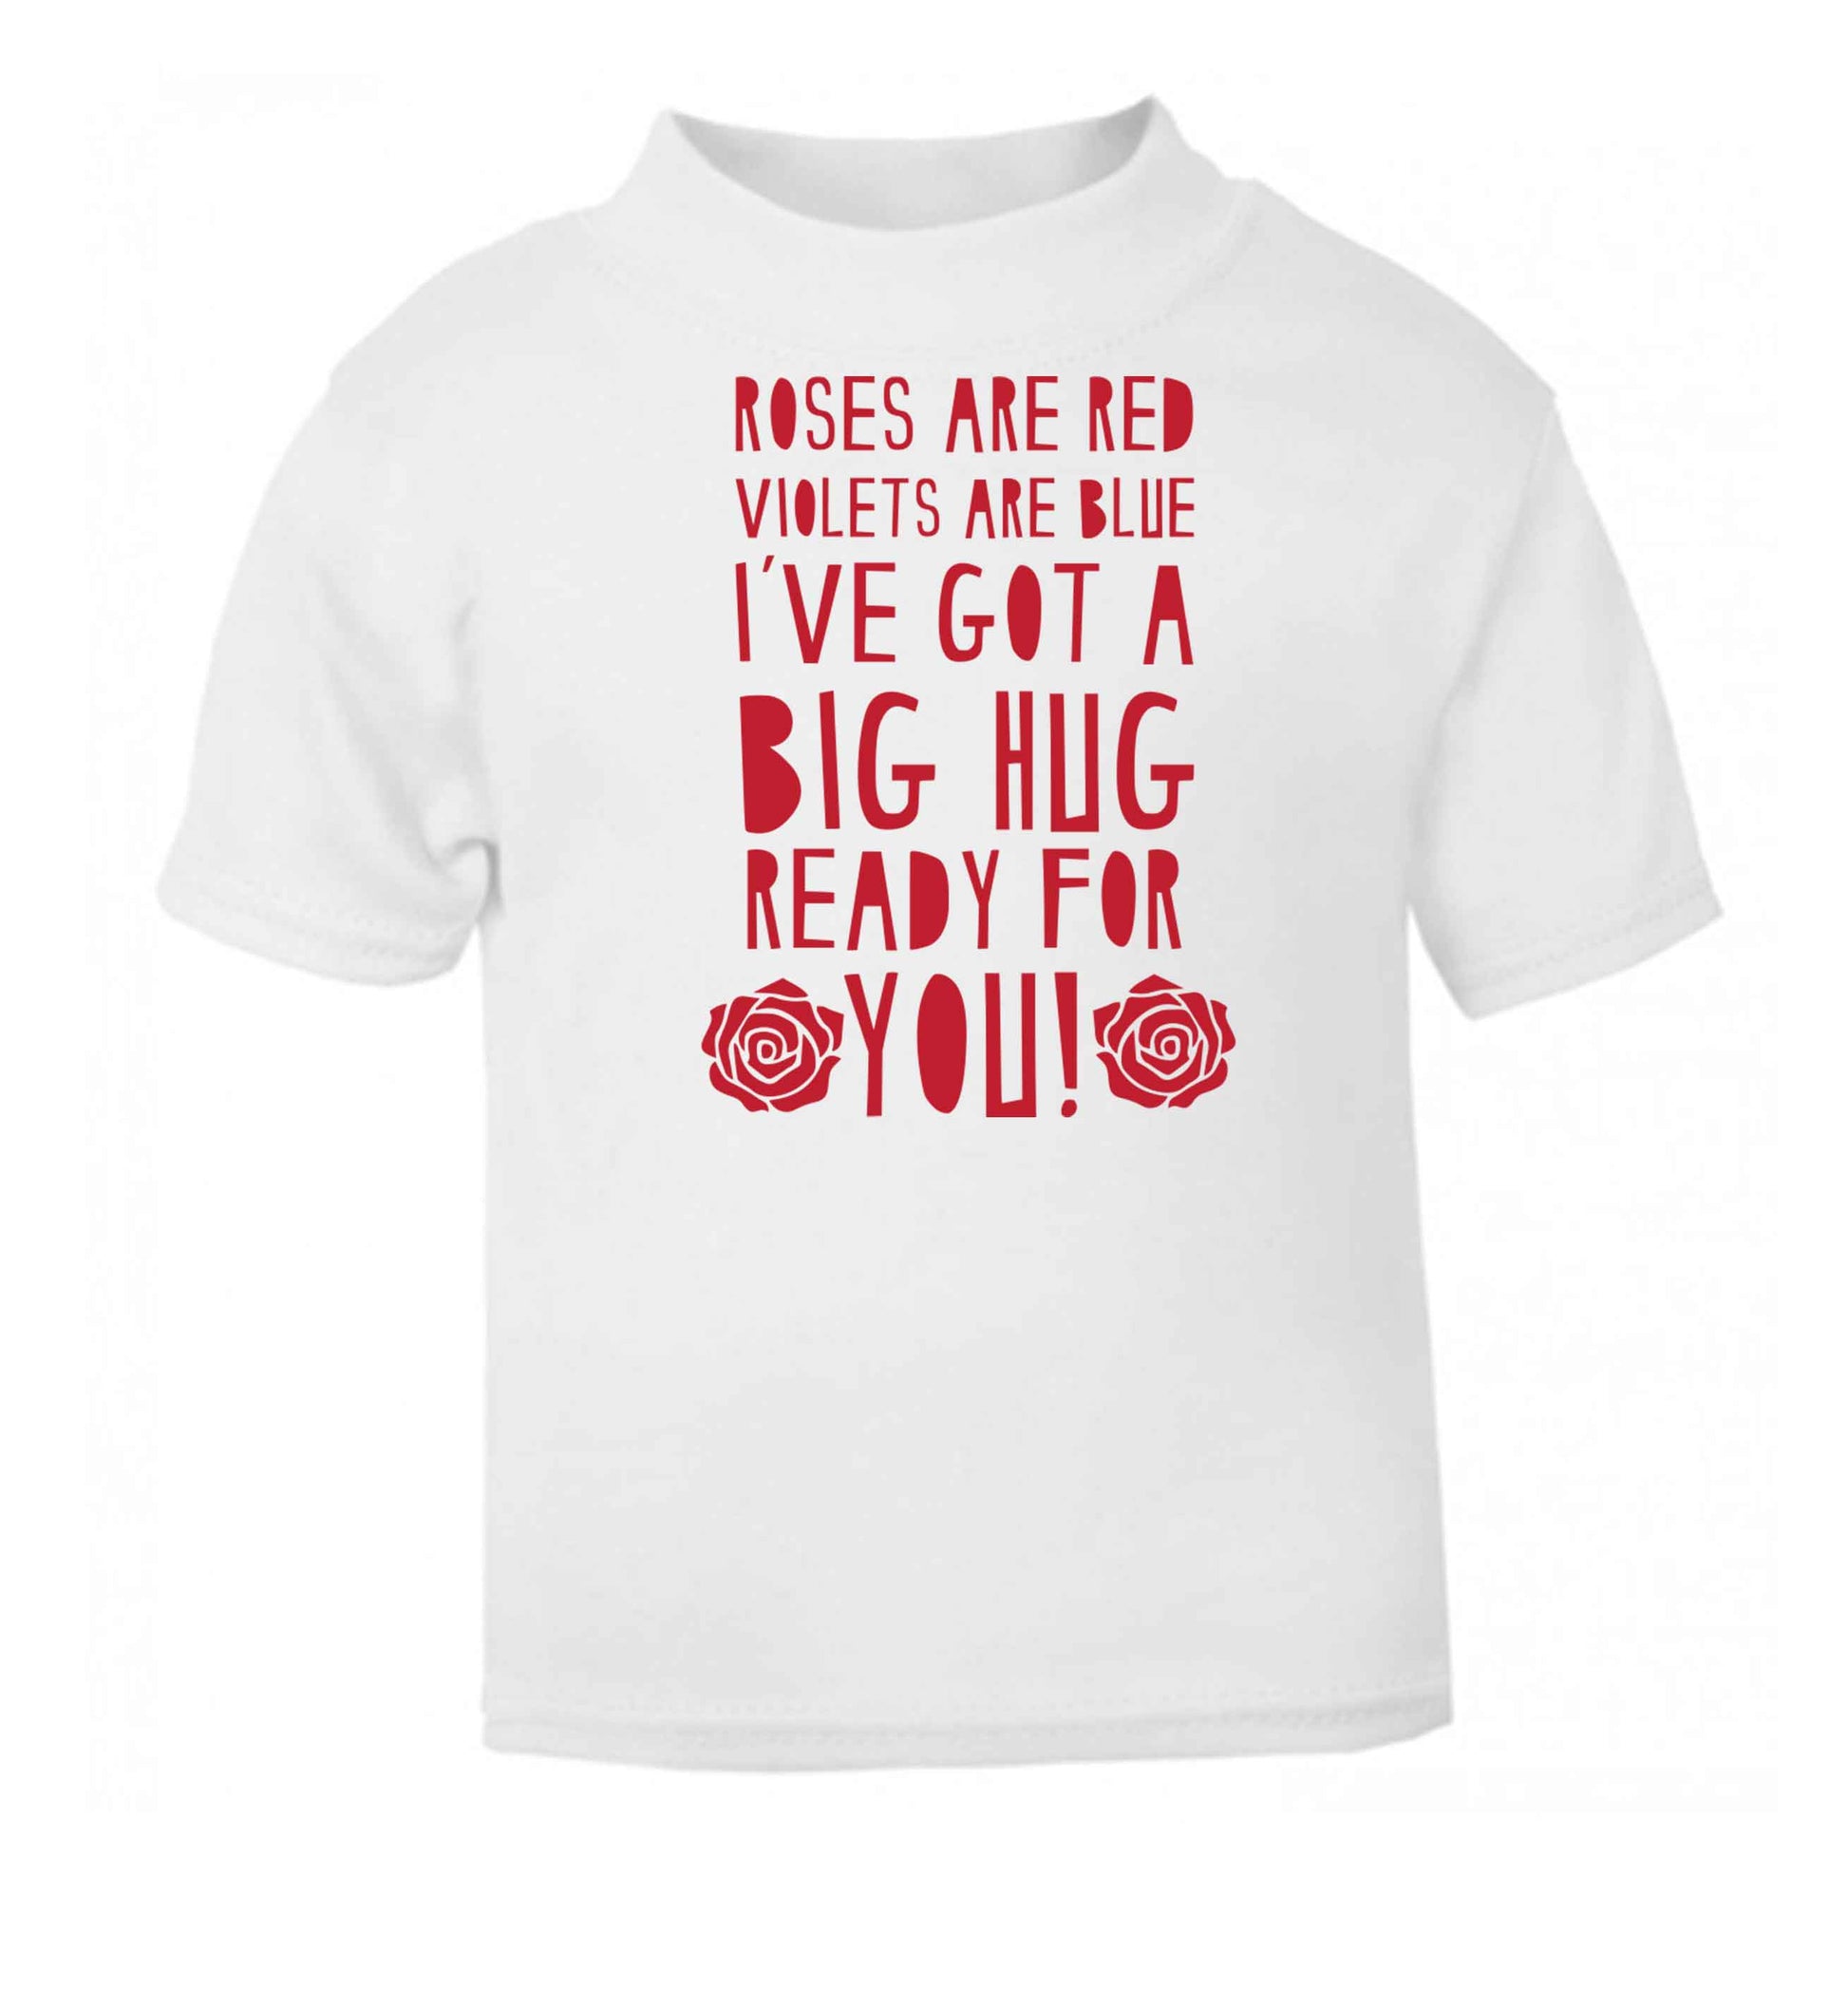 Roses are red violets are blue I've got a big hug coming for you white baby toddler Tshirt 2 Years